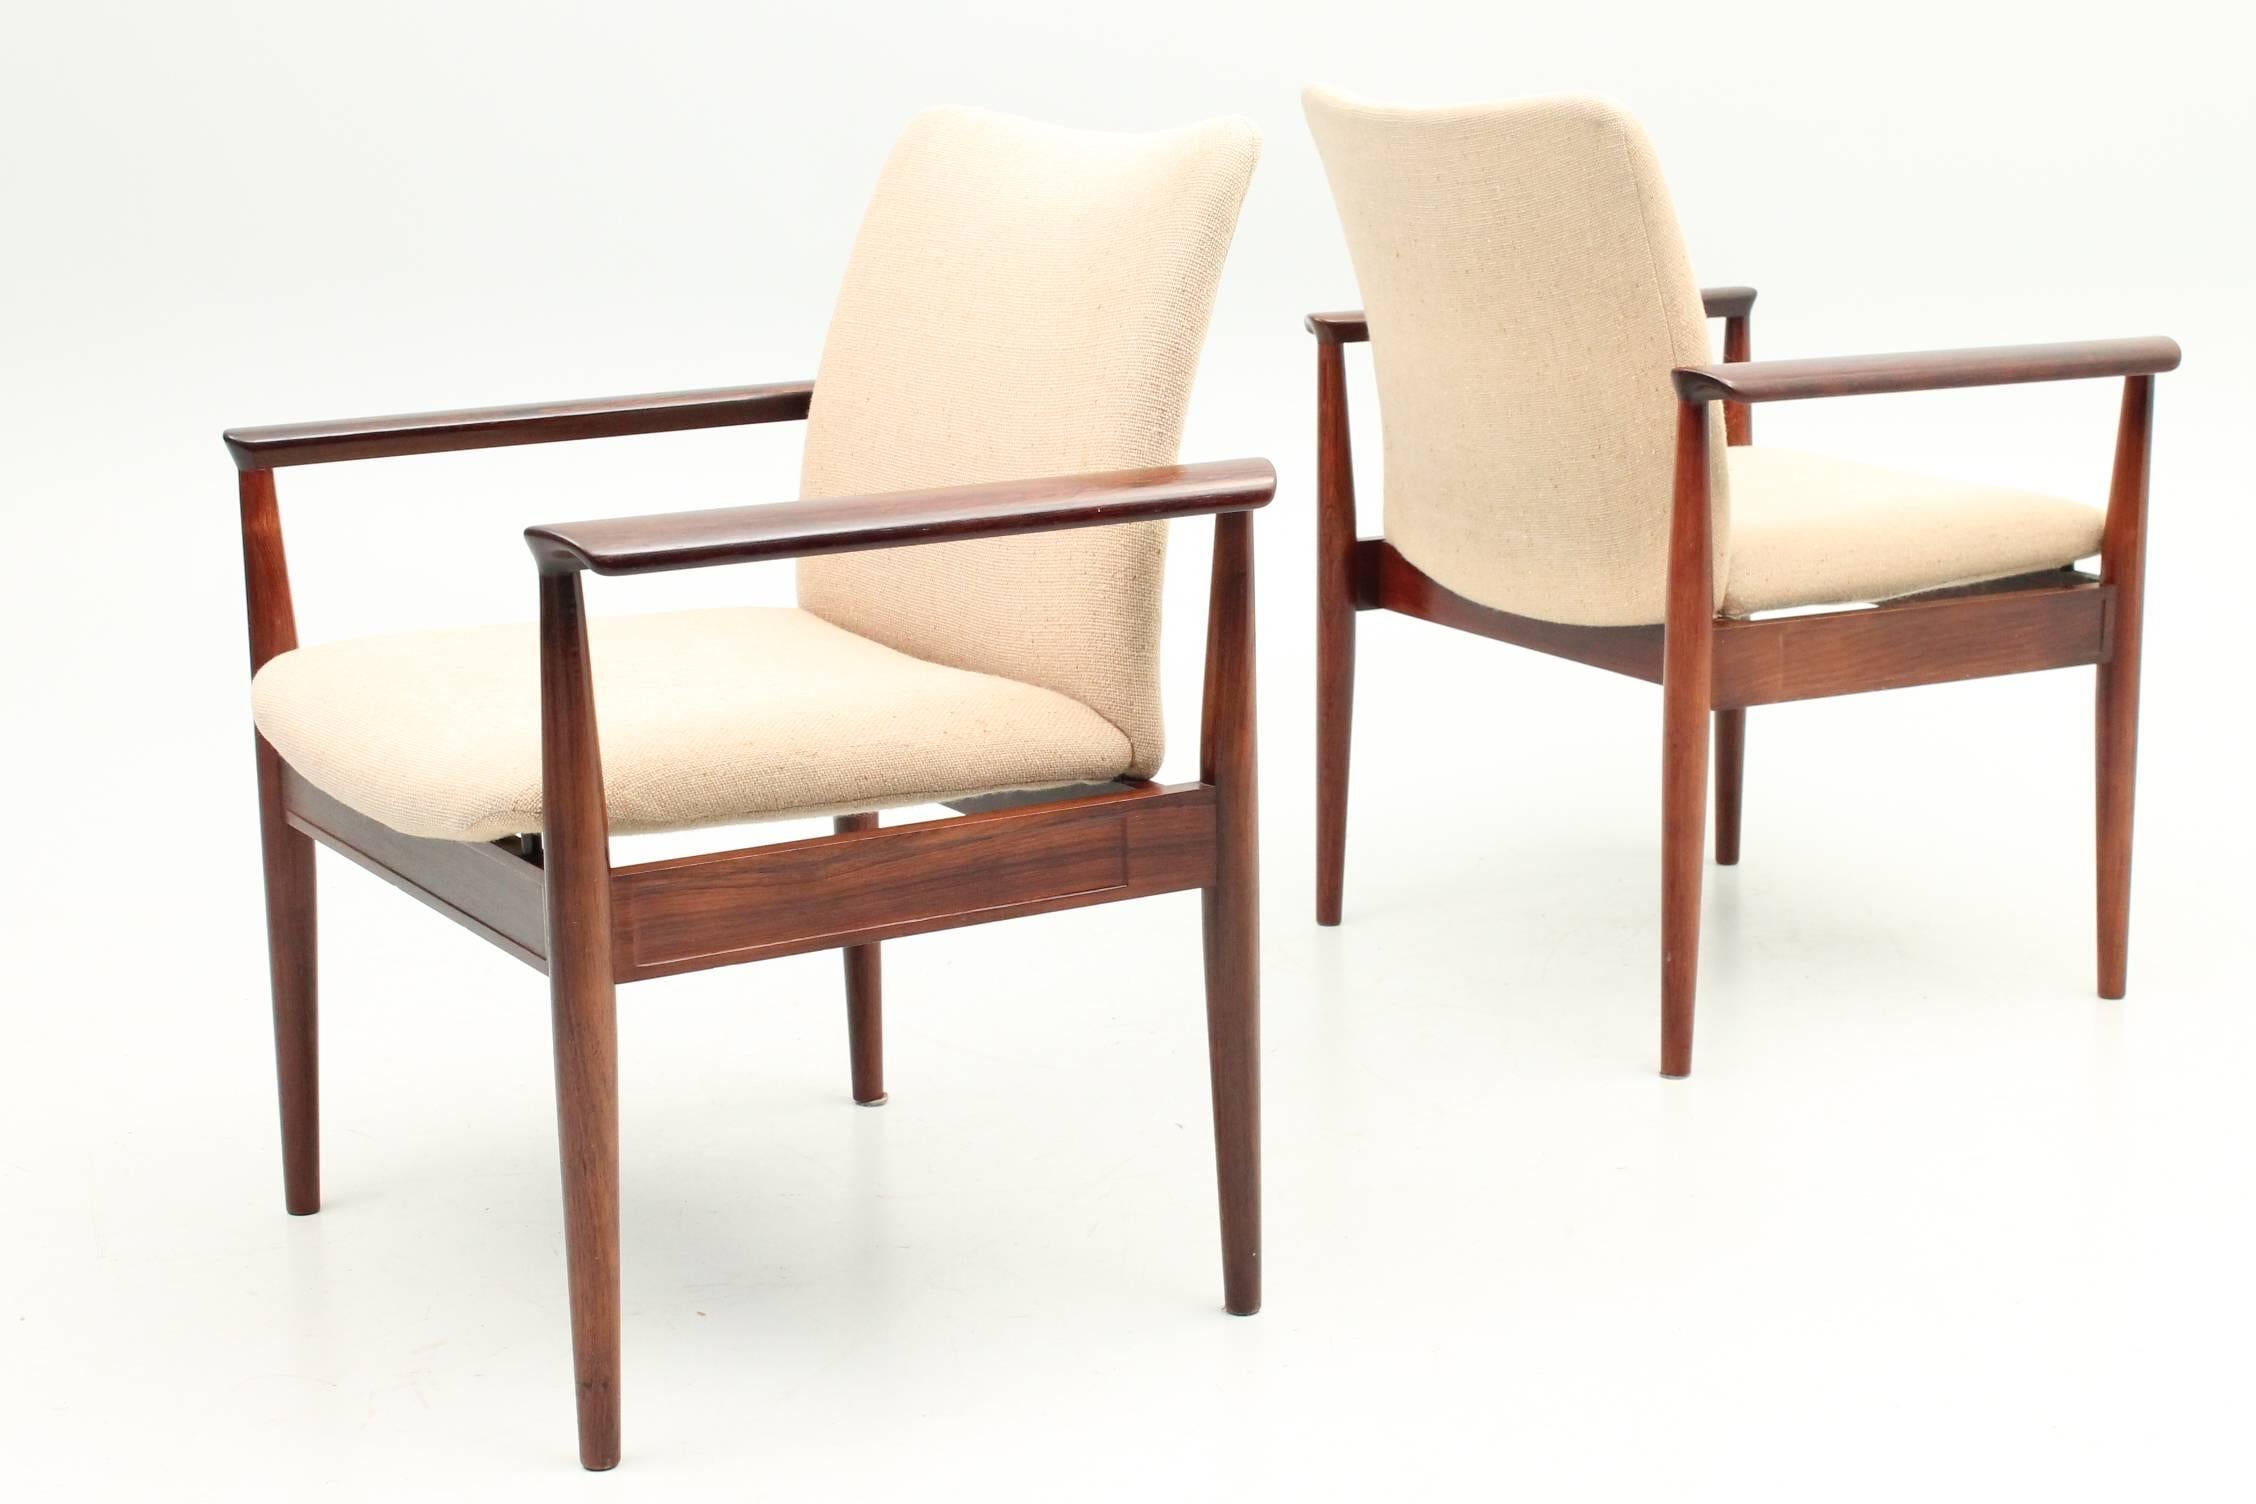 Beautiful set of four diplomat chairs designed by Finn Juhl for Cado. The cream upholstery perfectly contrasts the dark colored rosewood frame. These chairs are in excellent condition and still feature their original stamps and markings.
 